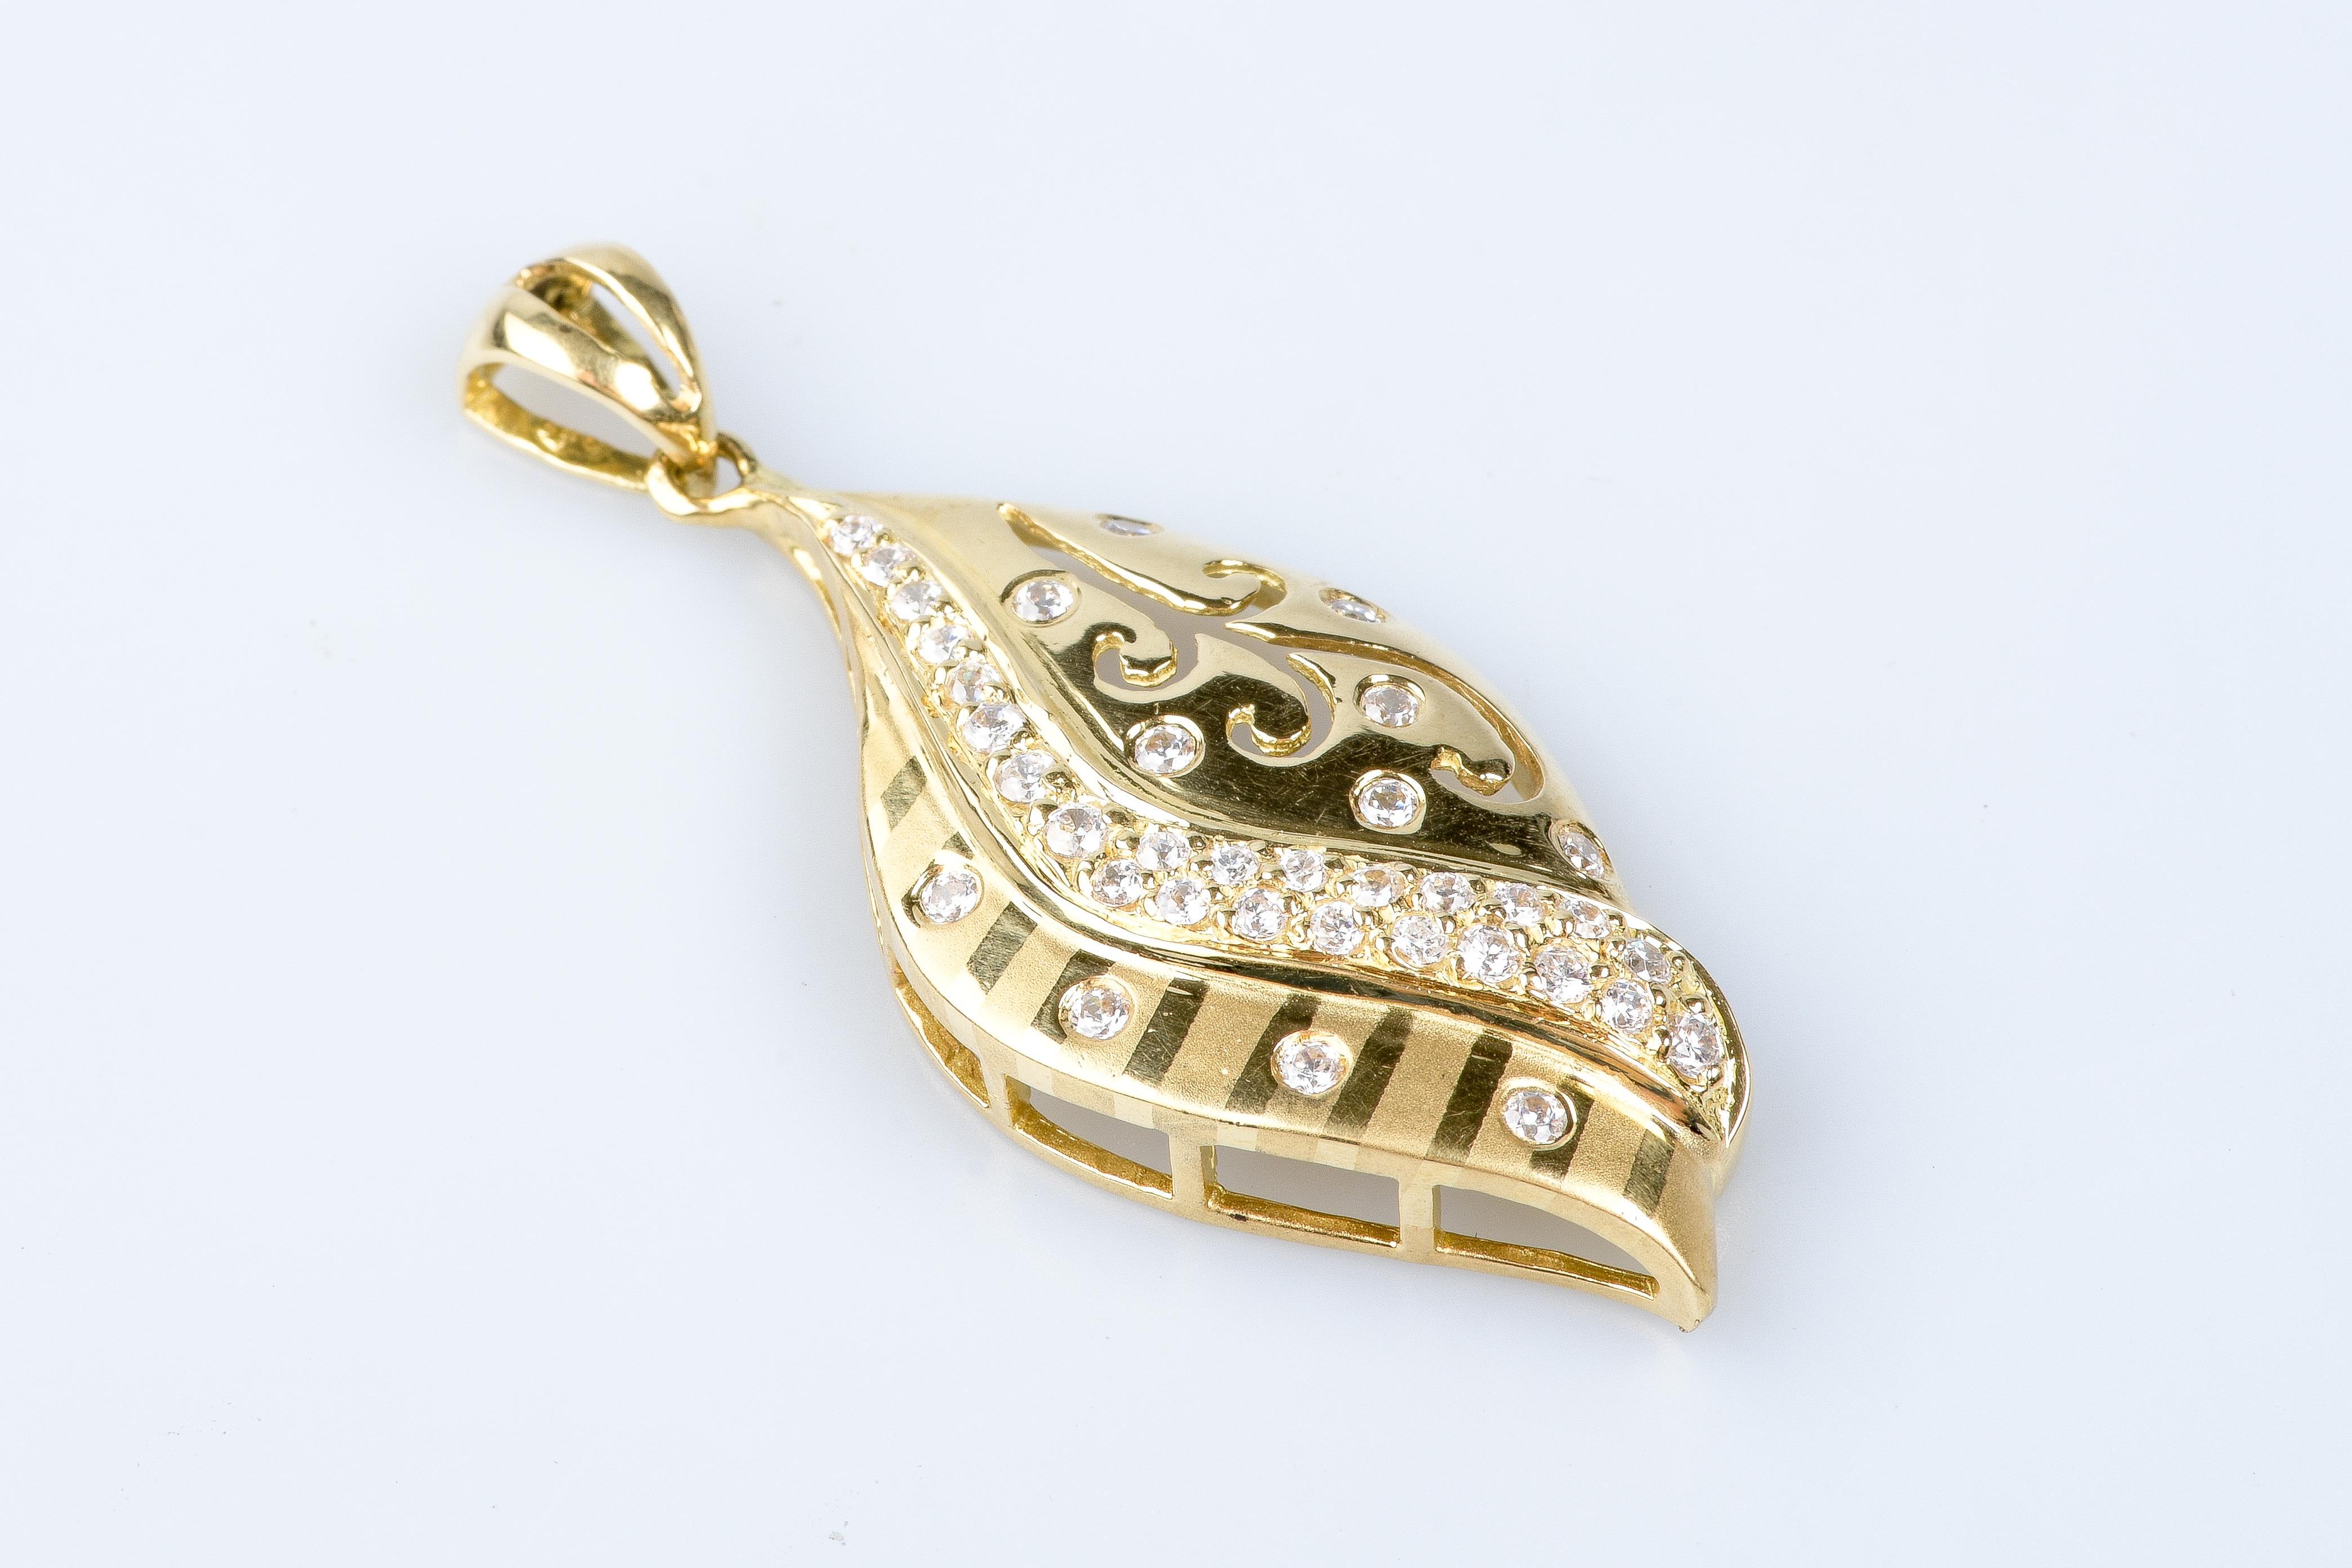 18 carat yellow gold pendant designed with zirconium oxides.

 Weight : 7.90 gr. 

Dimensions : 4.80 x 2.00 x 0.76 cm

Jewel delivered in a luxurious box with a certificate of authenticity Monte-Carlo Bijoux. 

Condition : Like new

18 carat gold